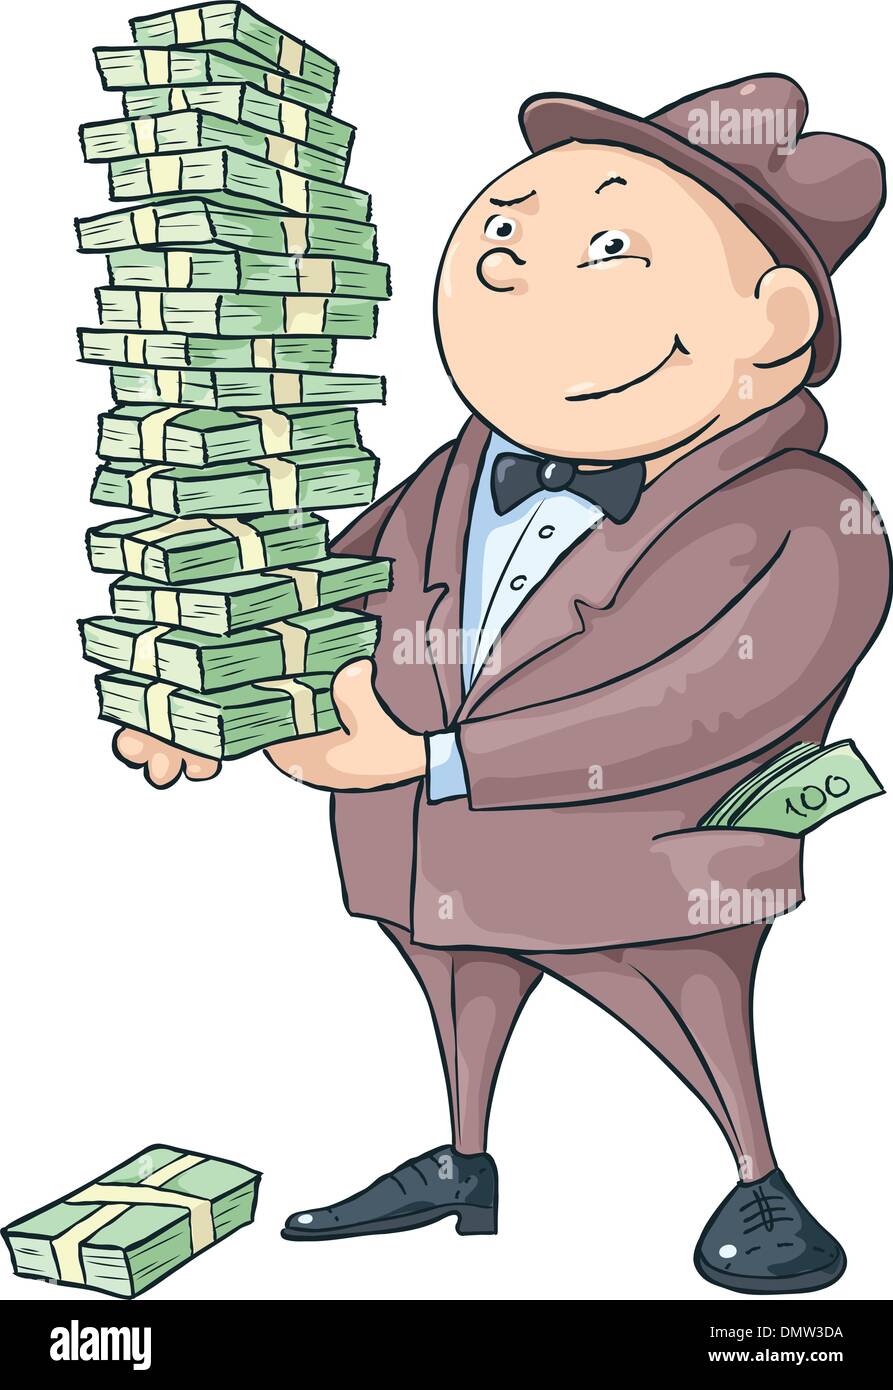 Rich man Stock Vector Images - Alamy